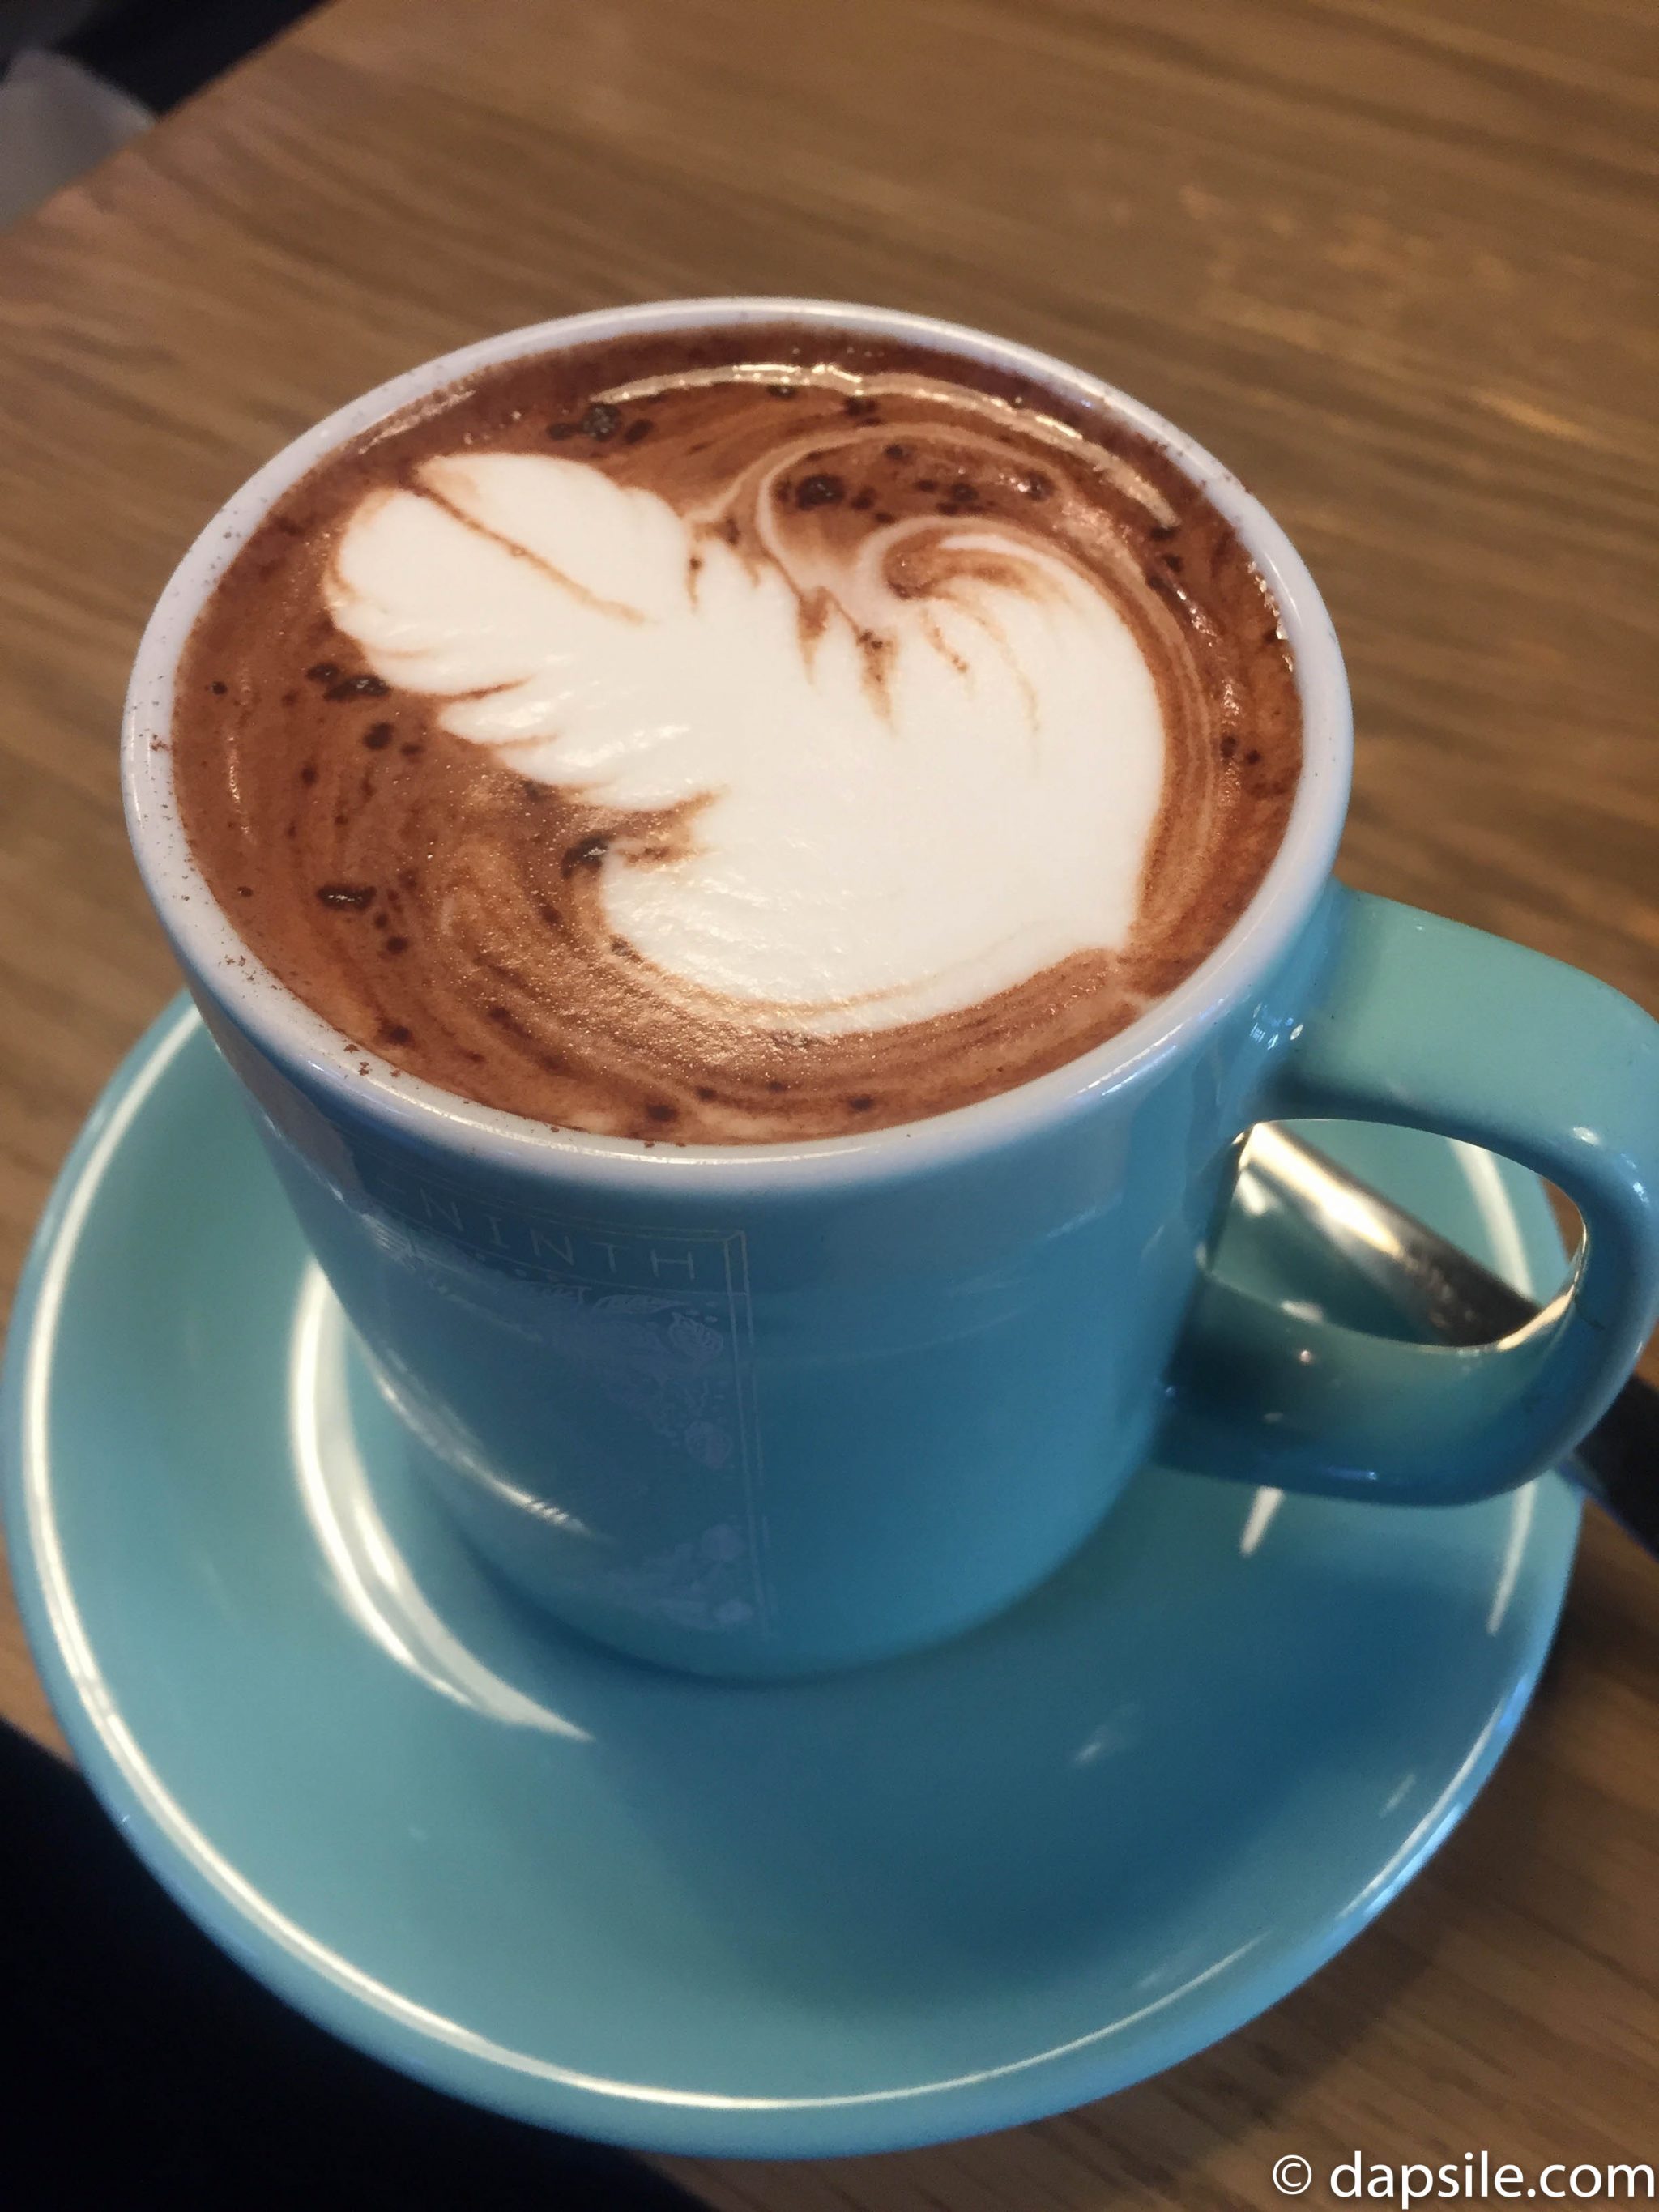 49th Parallel Hot Chocolate with a Phallic Design on top